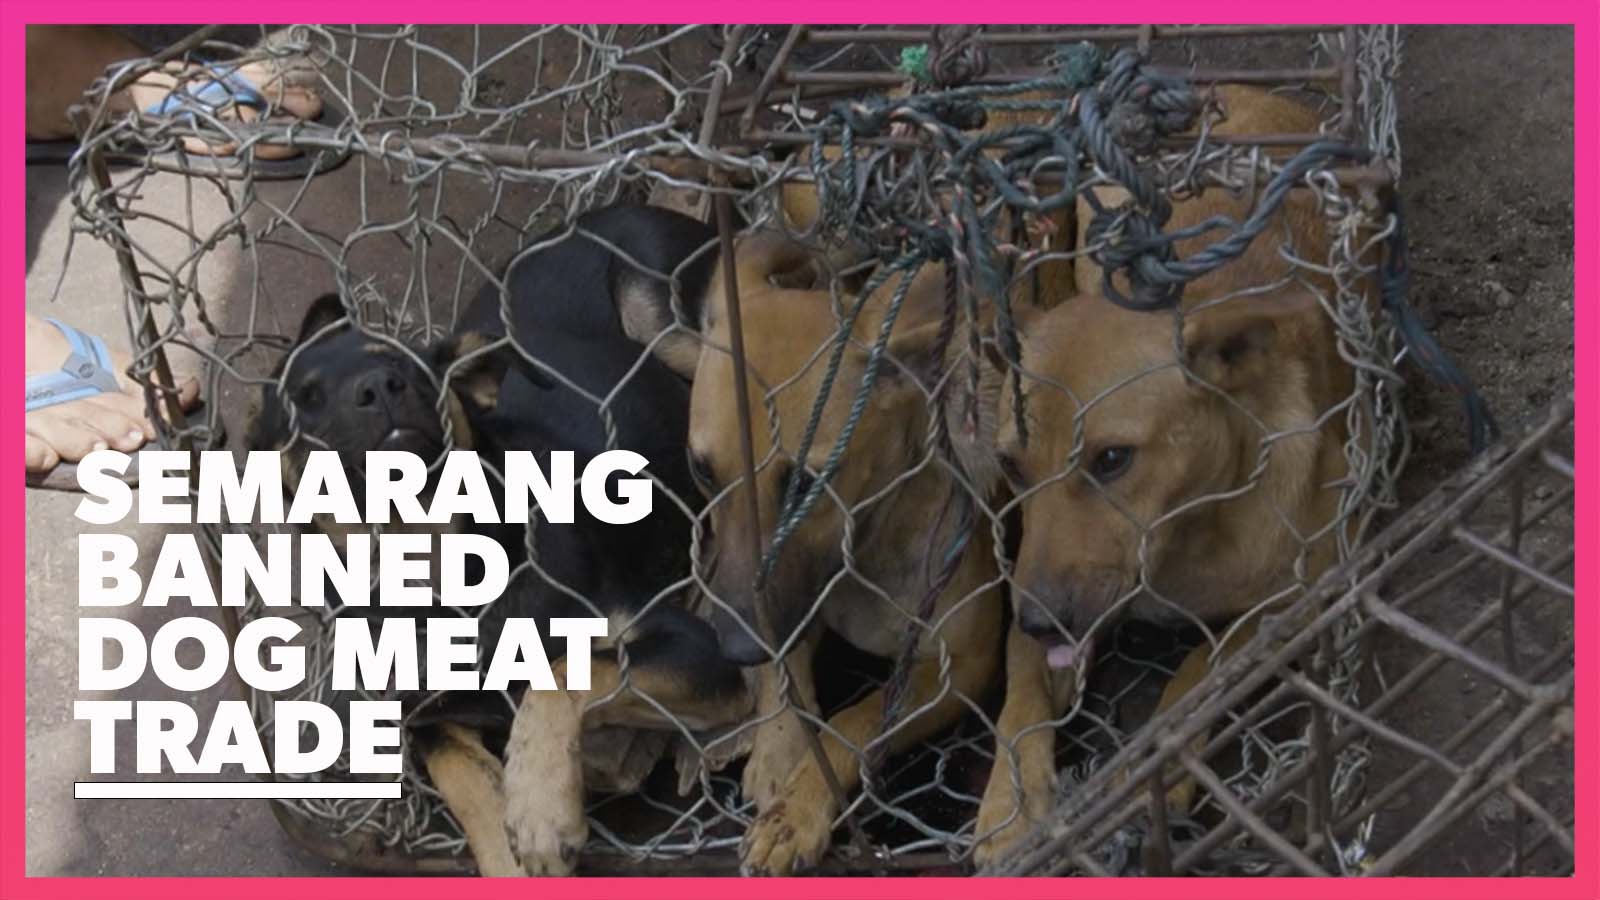 can you get rabies from dog meat